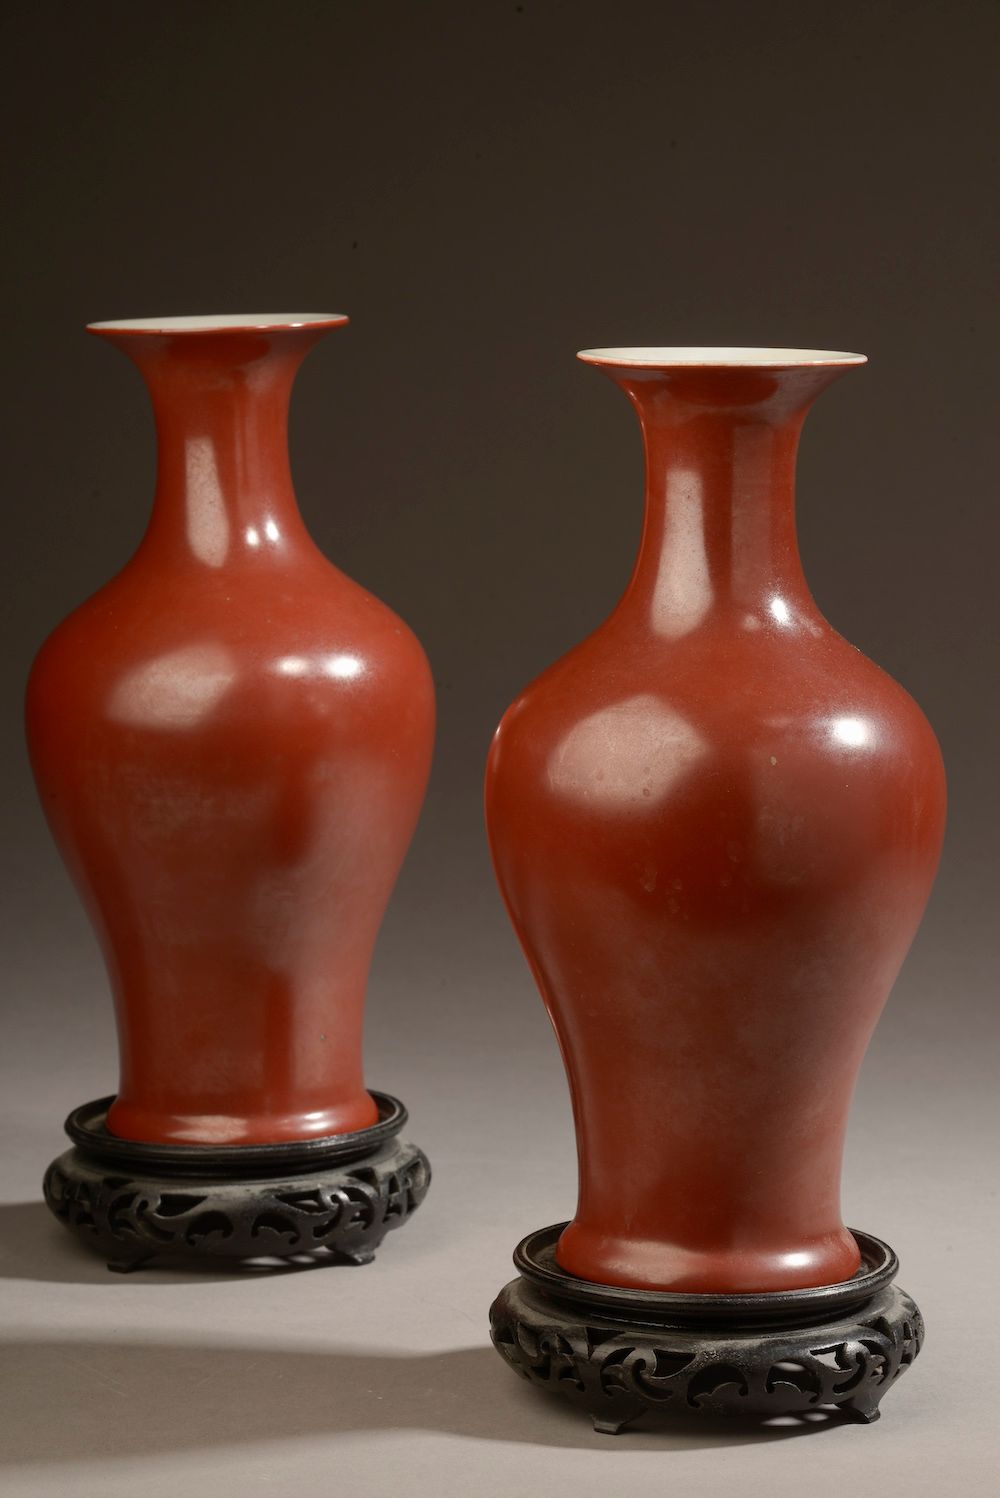 Null CHINA - Circa 1900.

A pair of red enamelled porcelain baluster vases with &hellip;